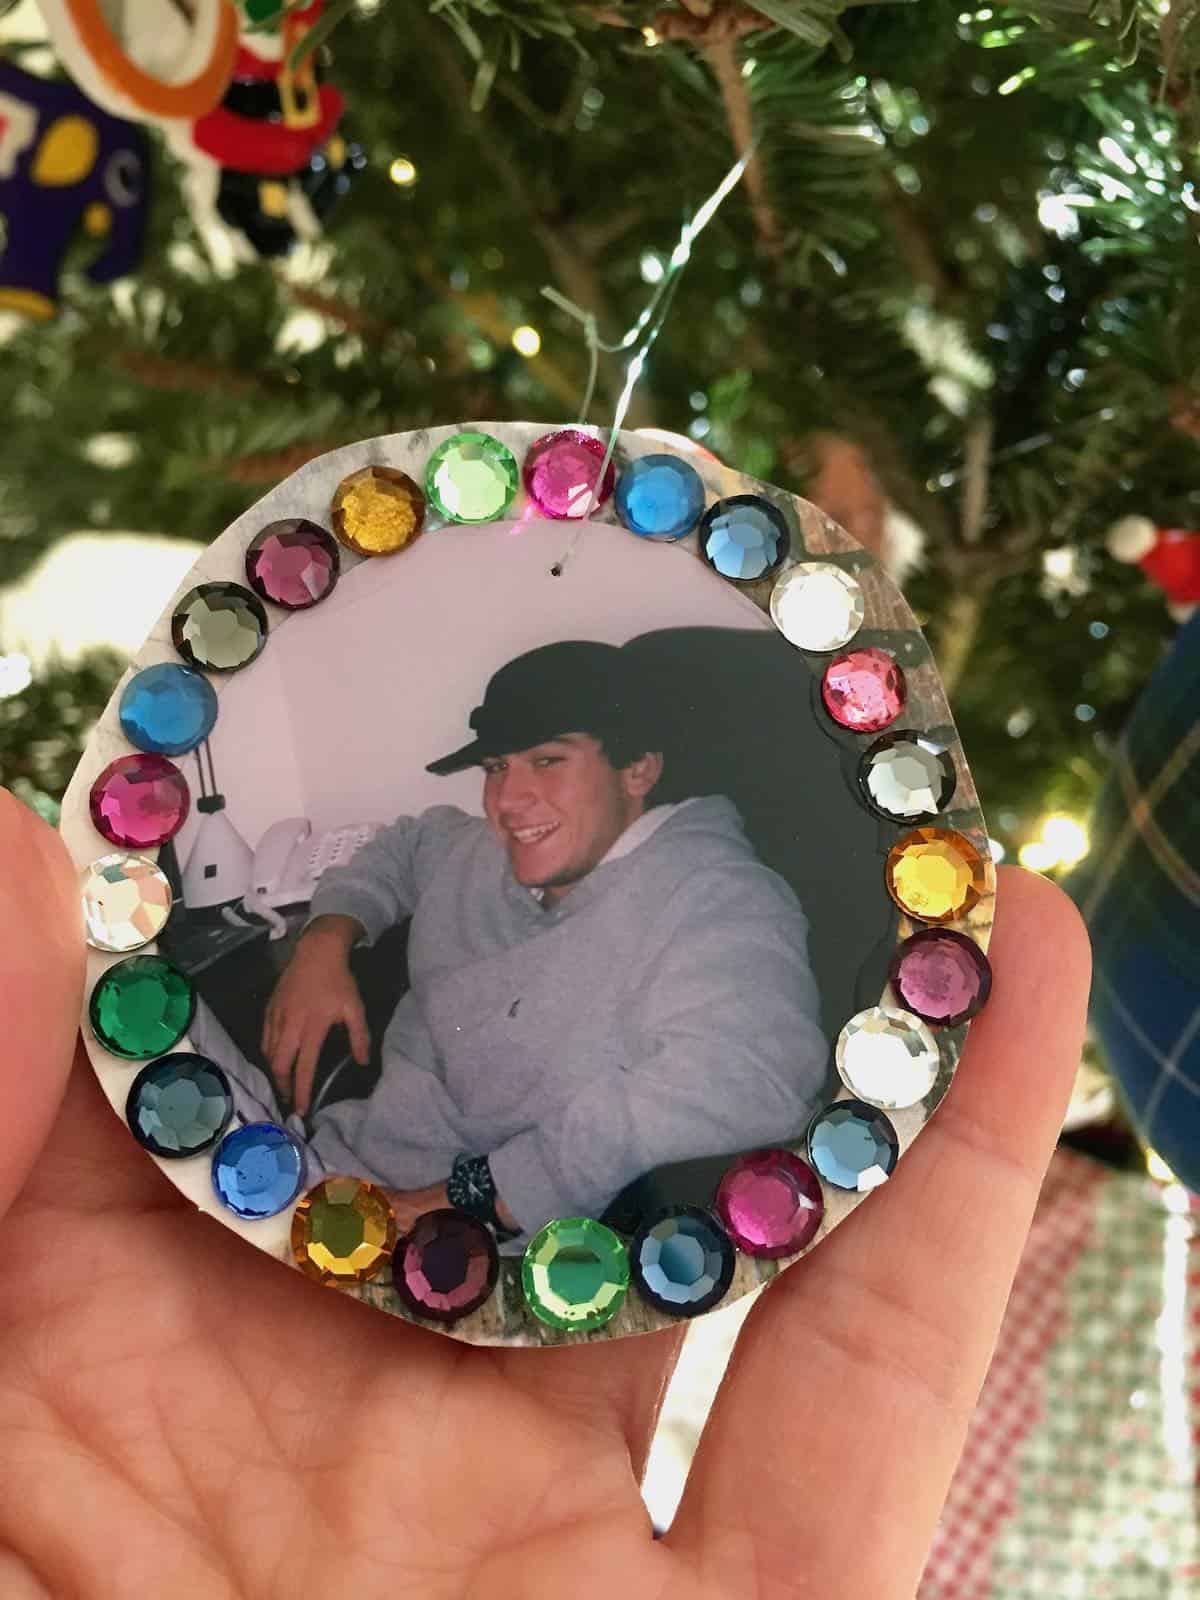 Another xmas ornament photo of Will.